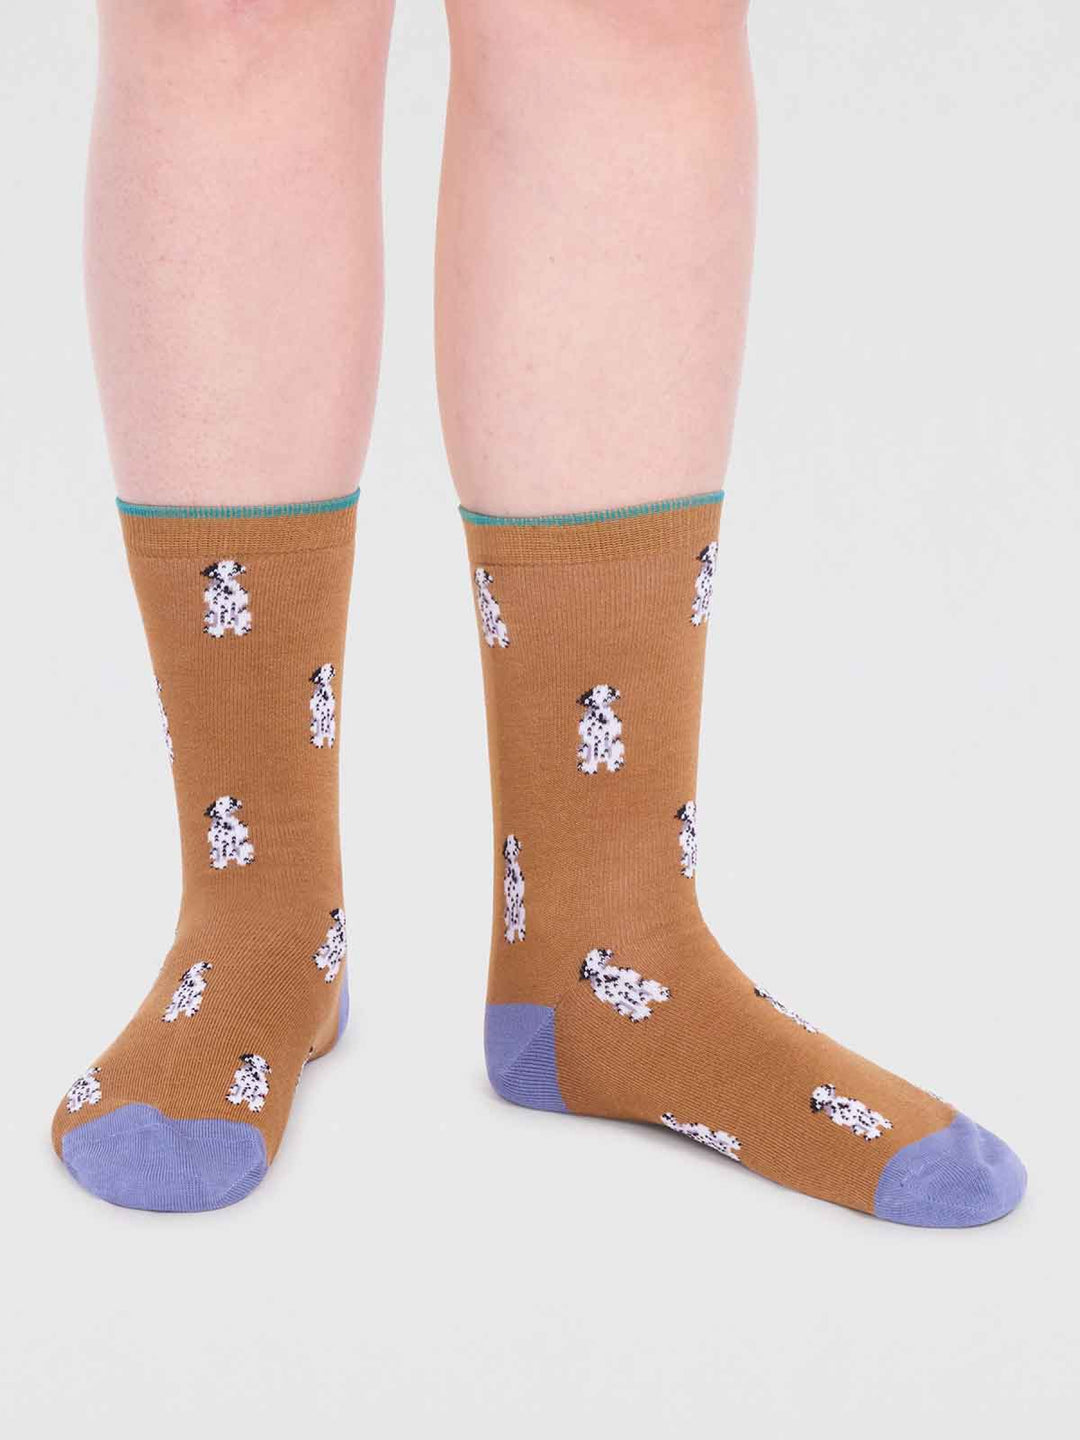 Socks for dog lovers We Are Thought